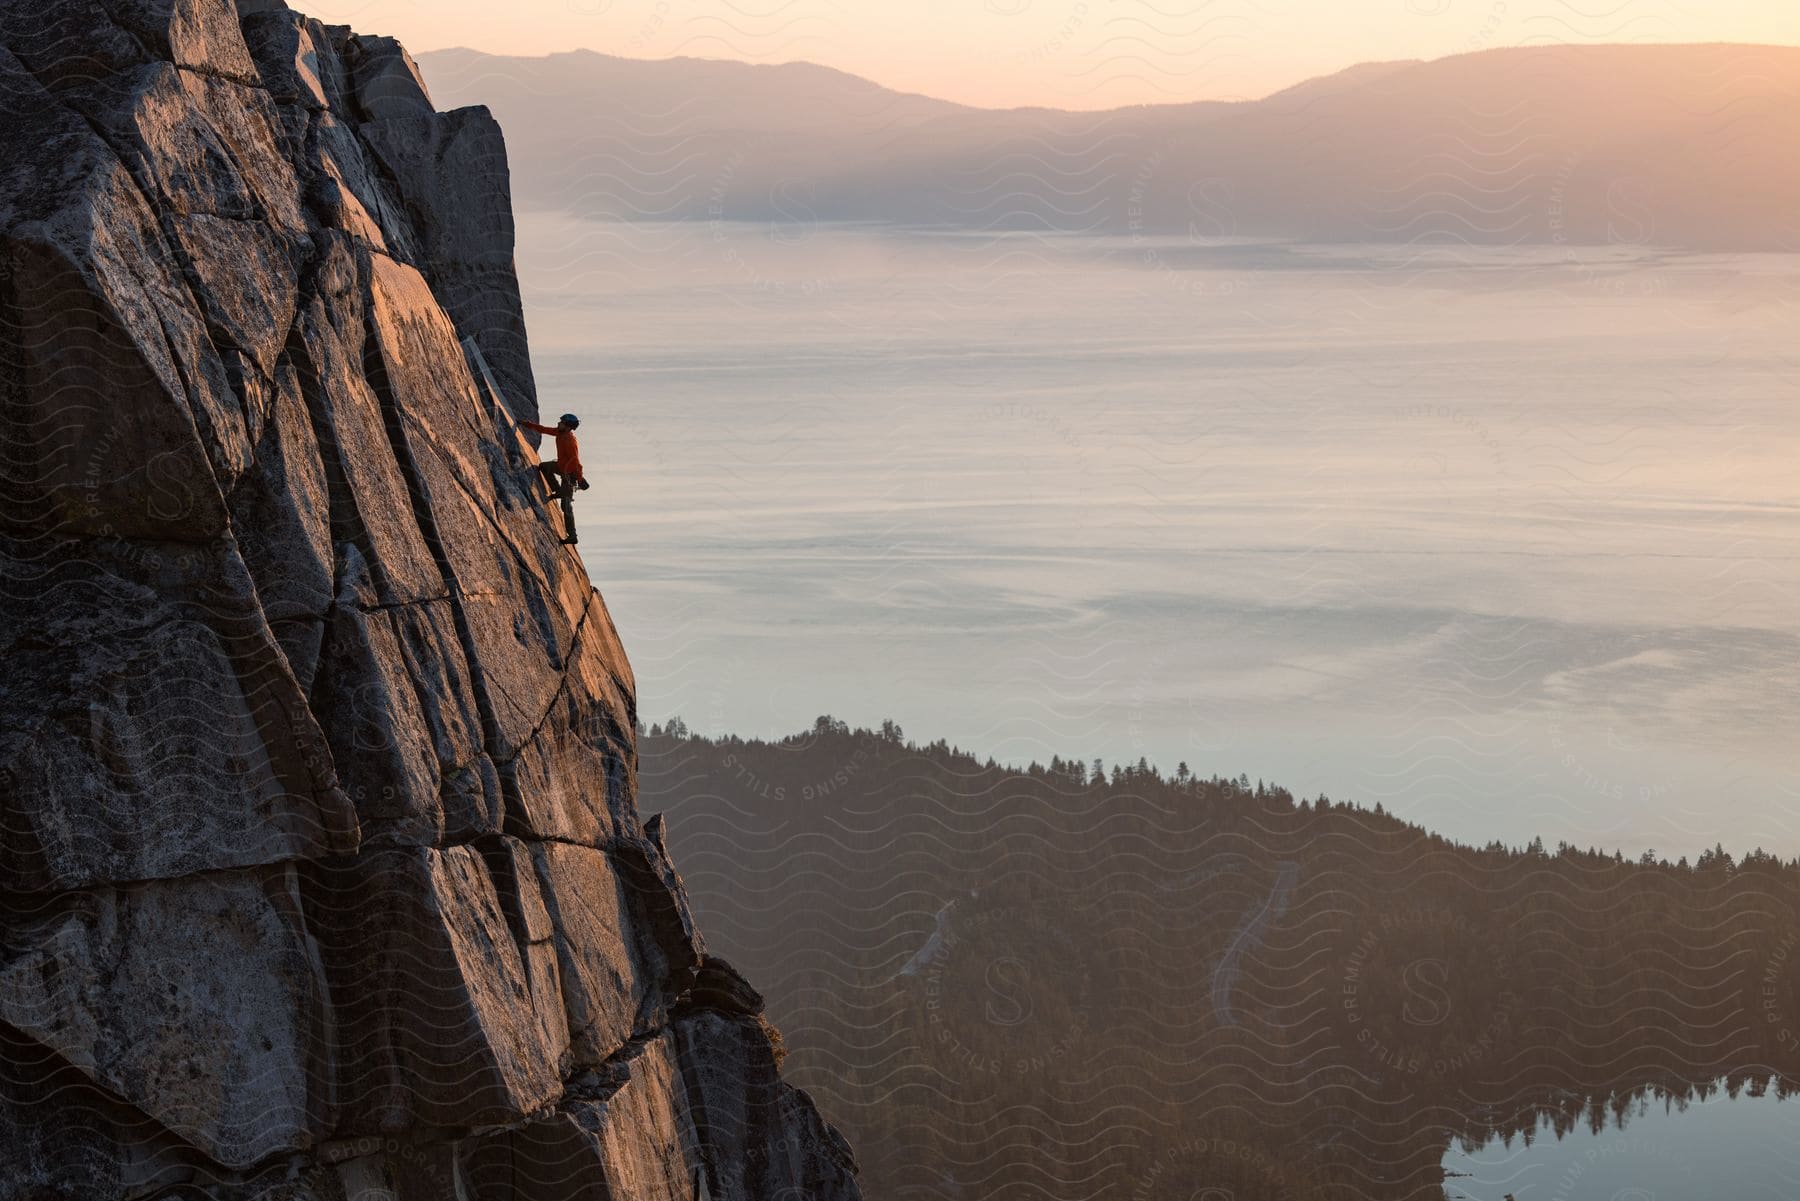 A person climbing a rocky cliff near a lake in south lake tahoe